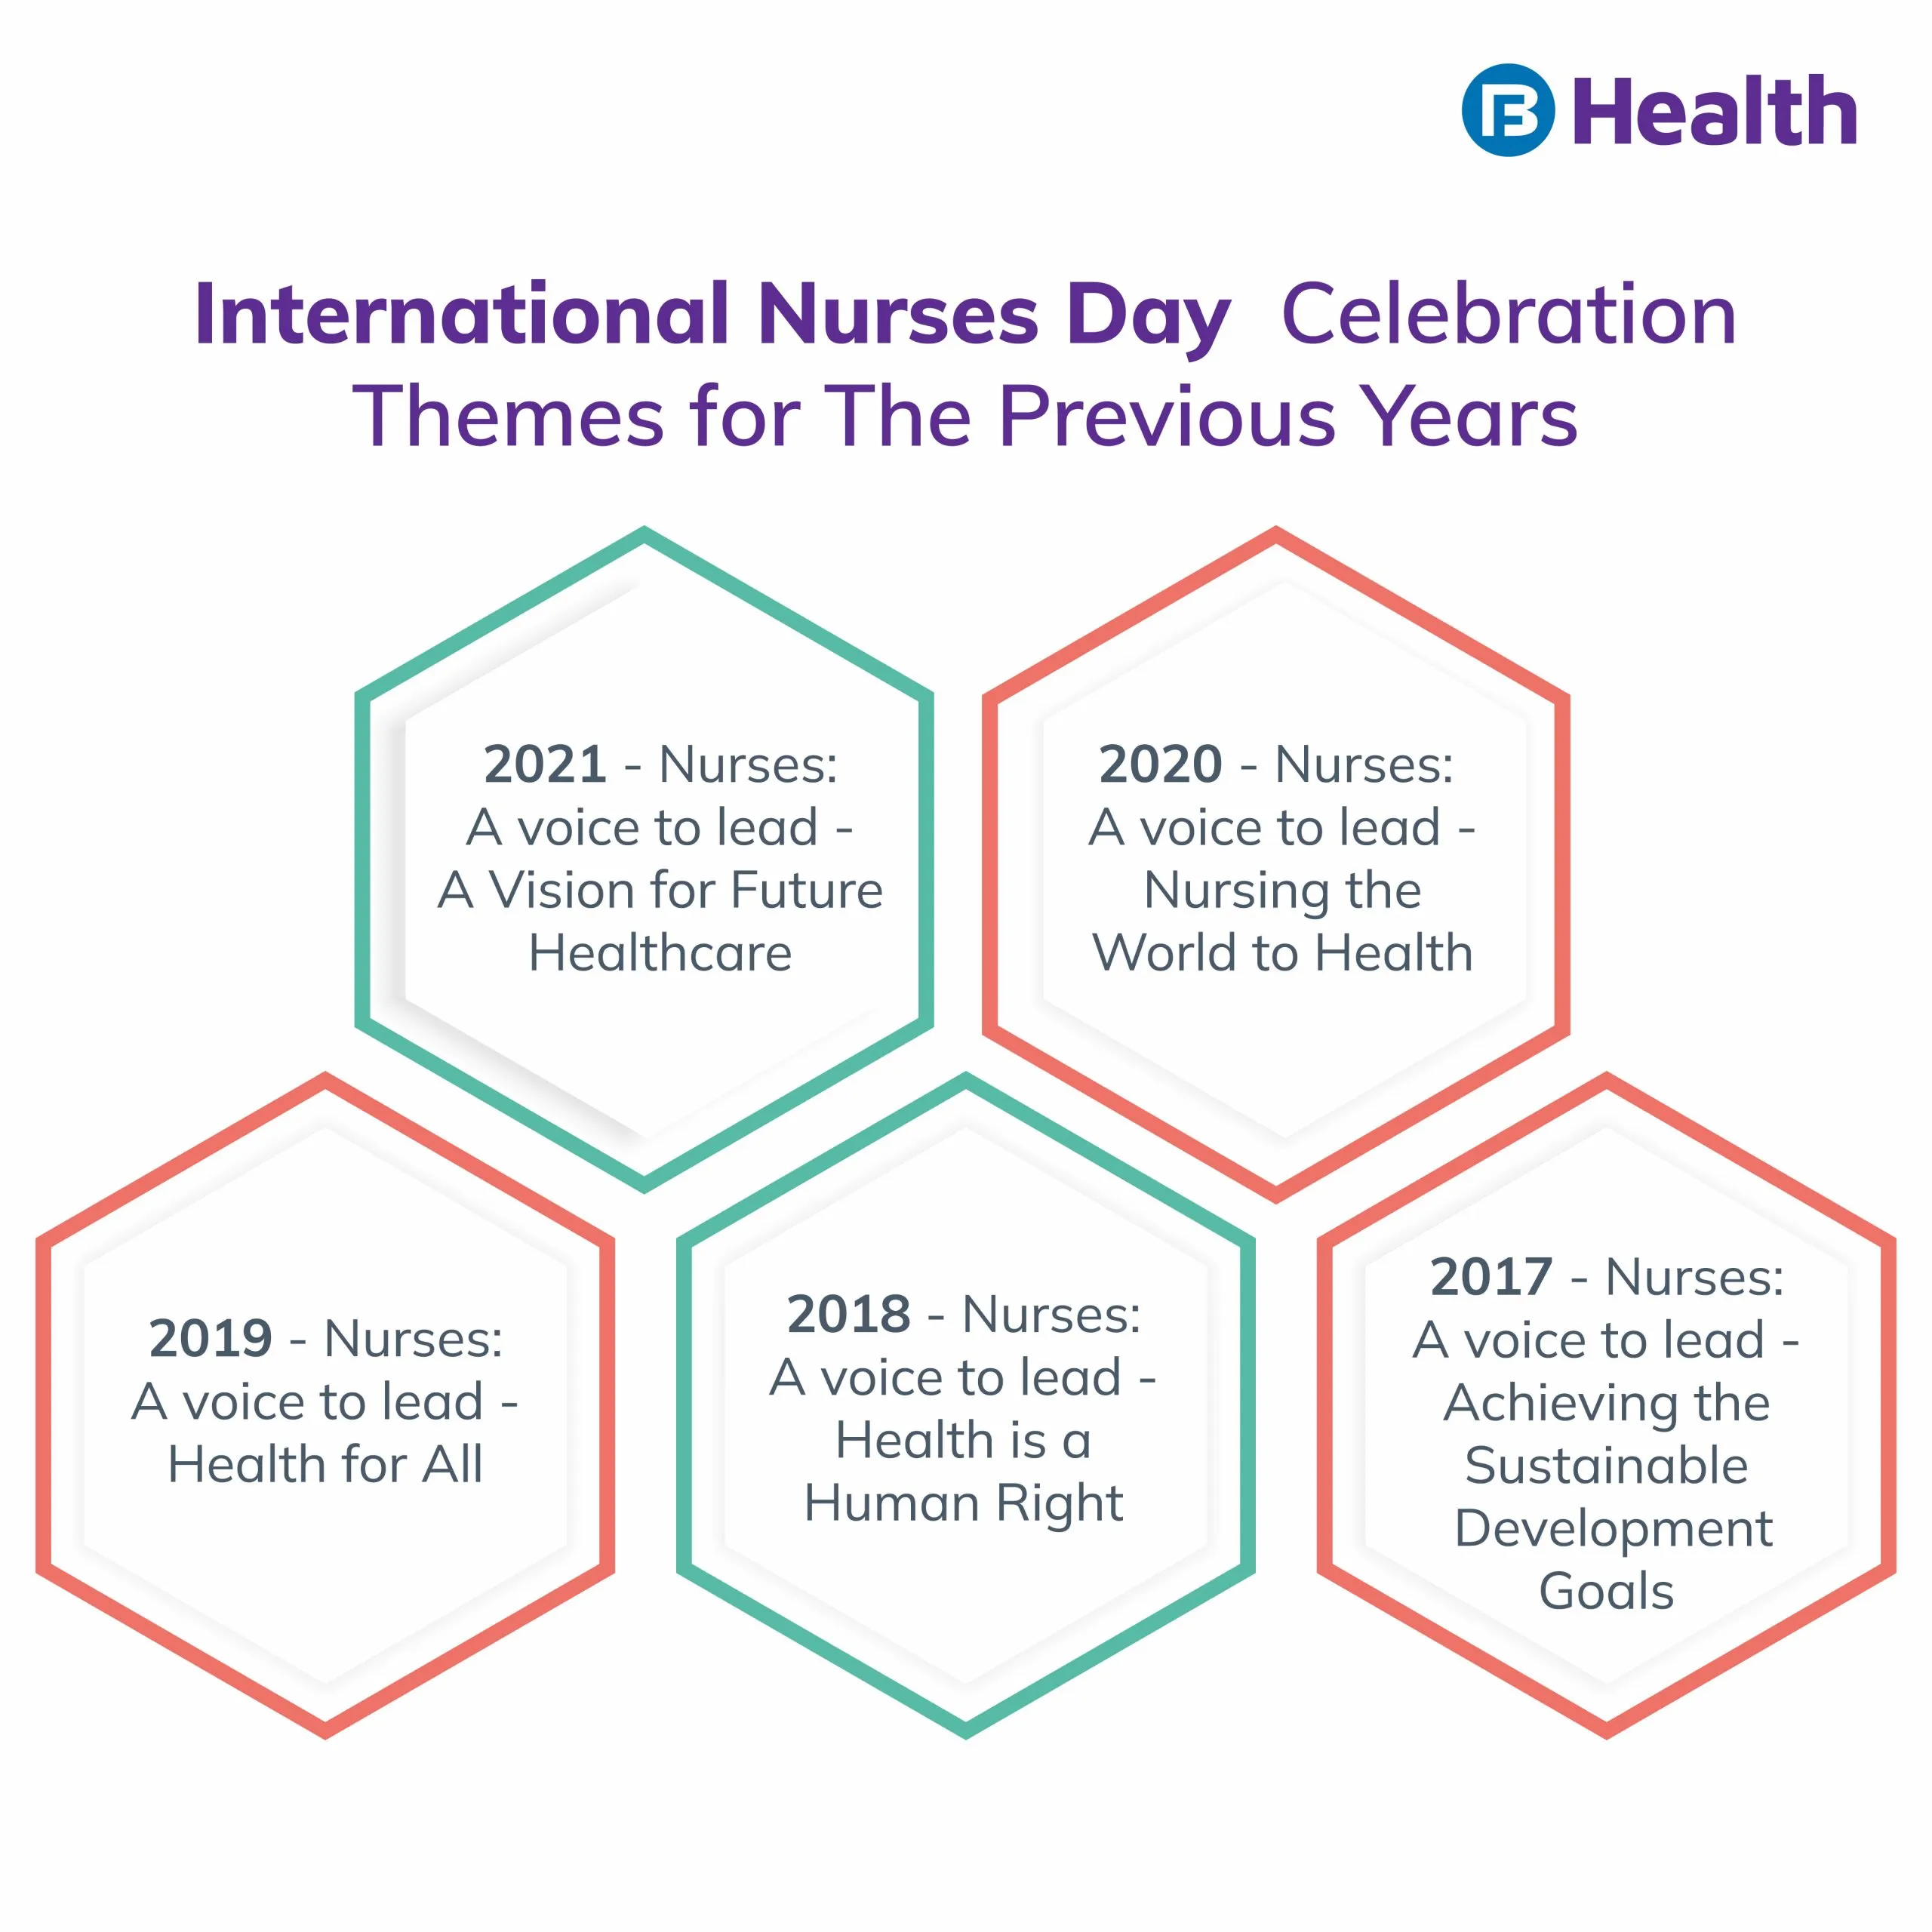 International Nurses Day themes for the previous years